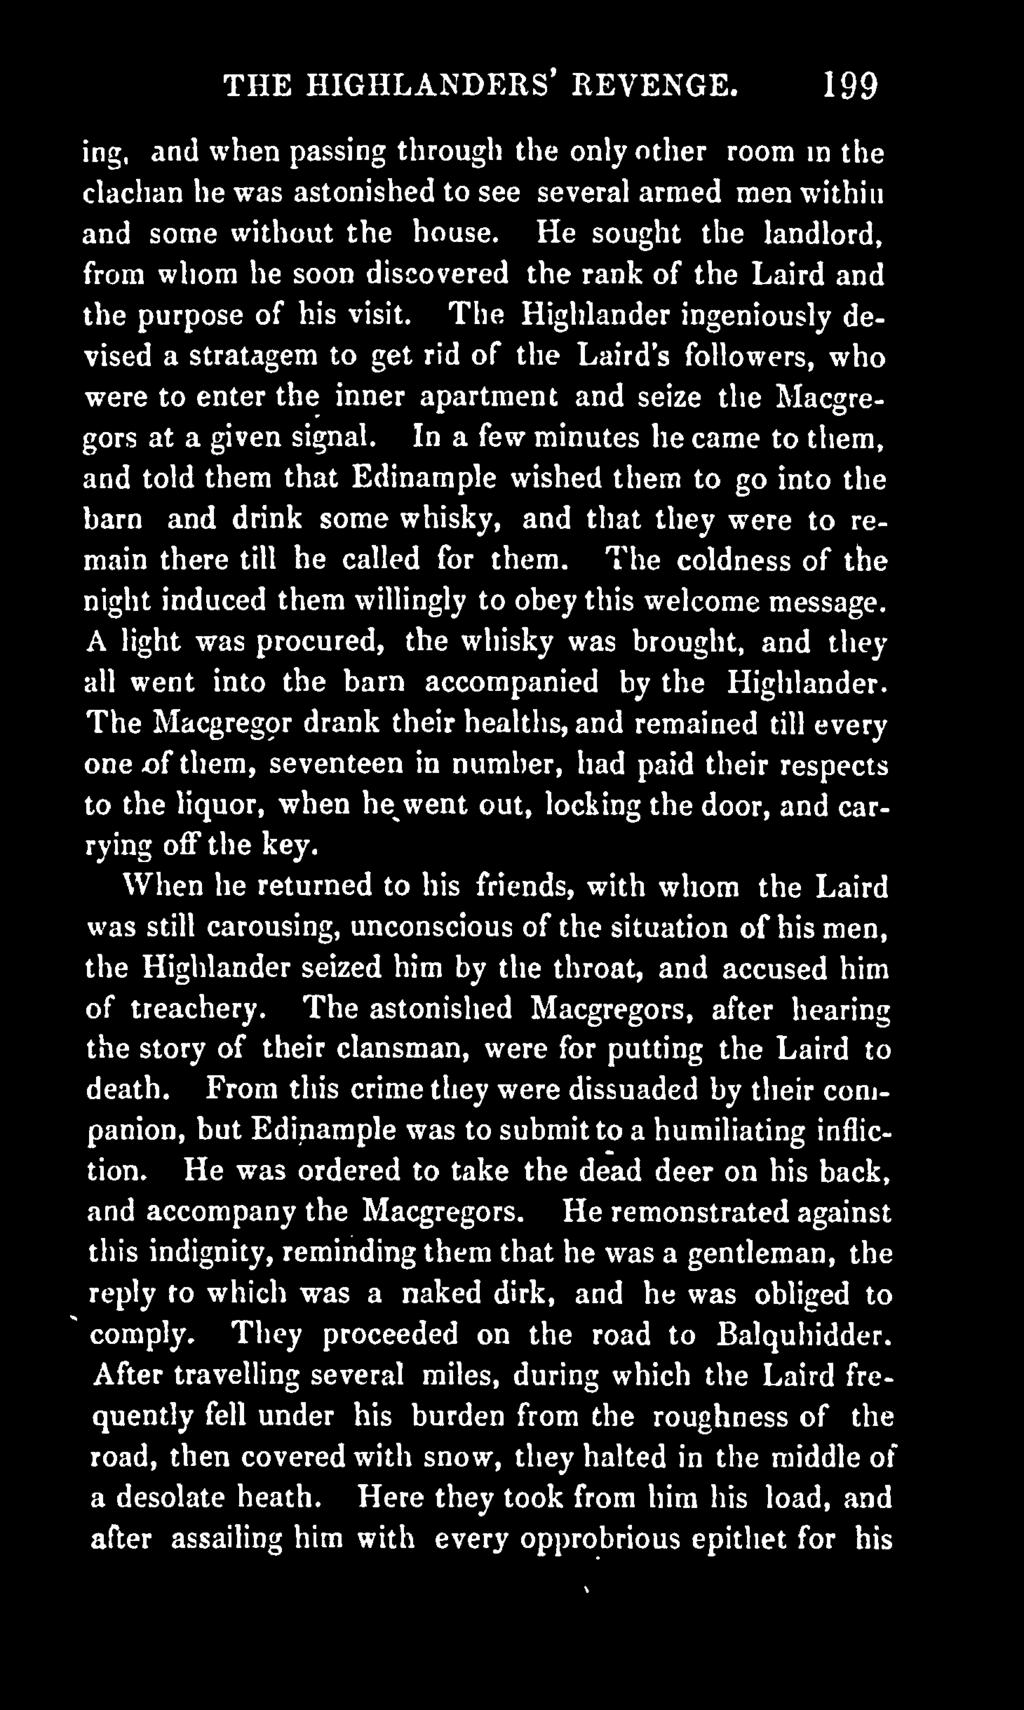 The Highlander ingeniously devised a stratagem to get rid of the Laird's followers, who were to enter the inner apartment and seize the Macgregors at a given signal.